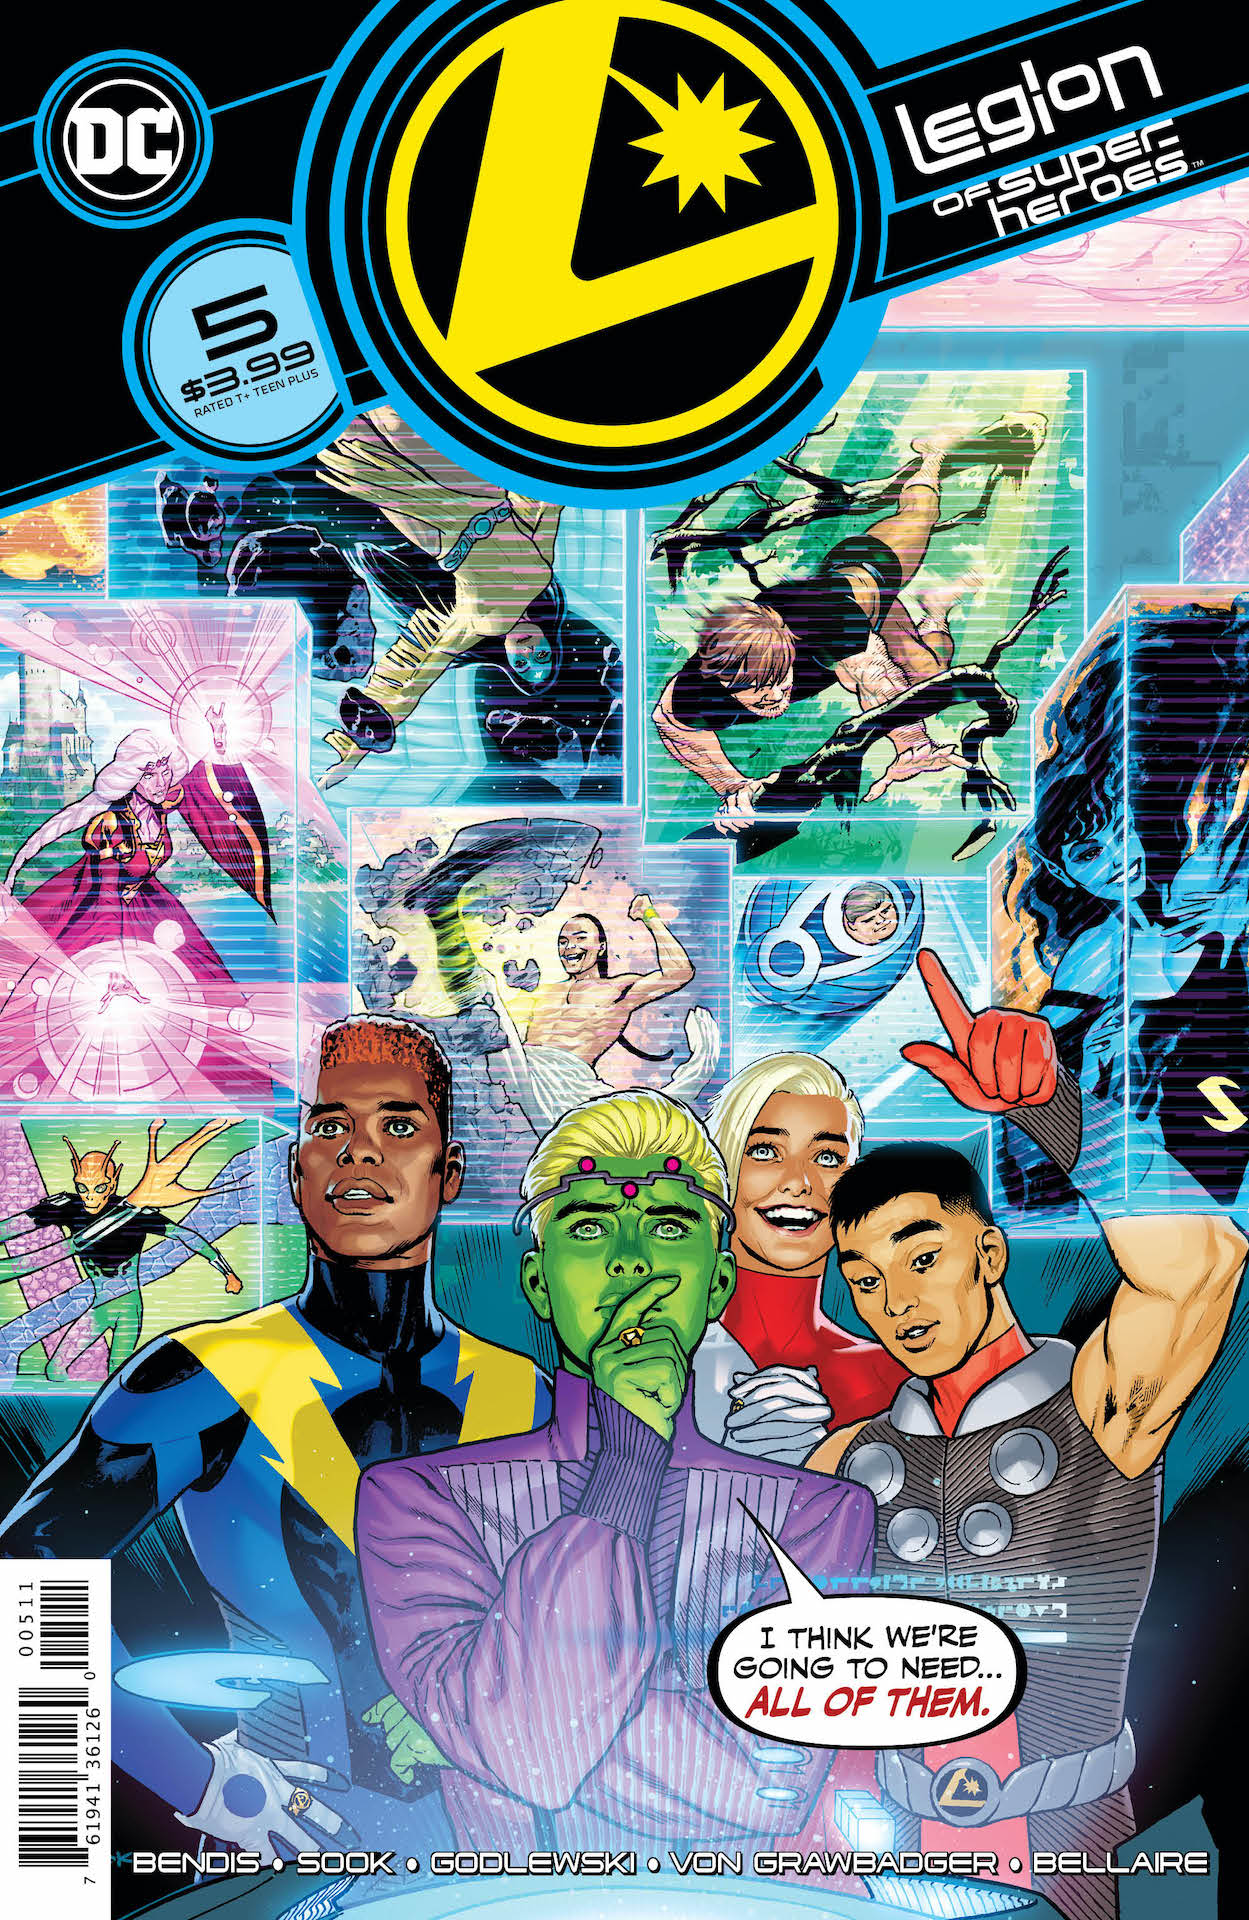 DC Preview: Legion of Super-Heroes #5